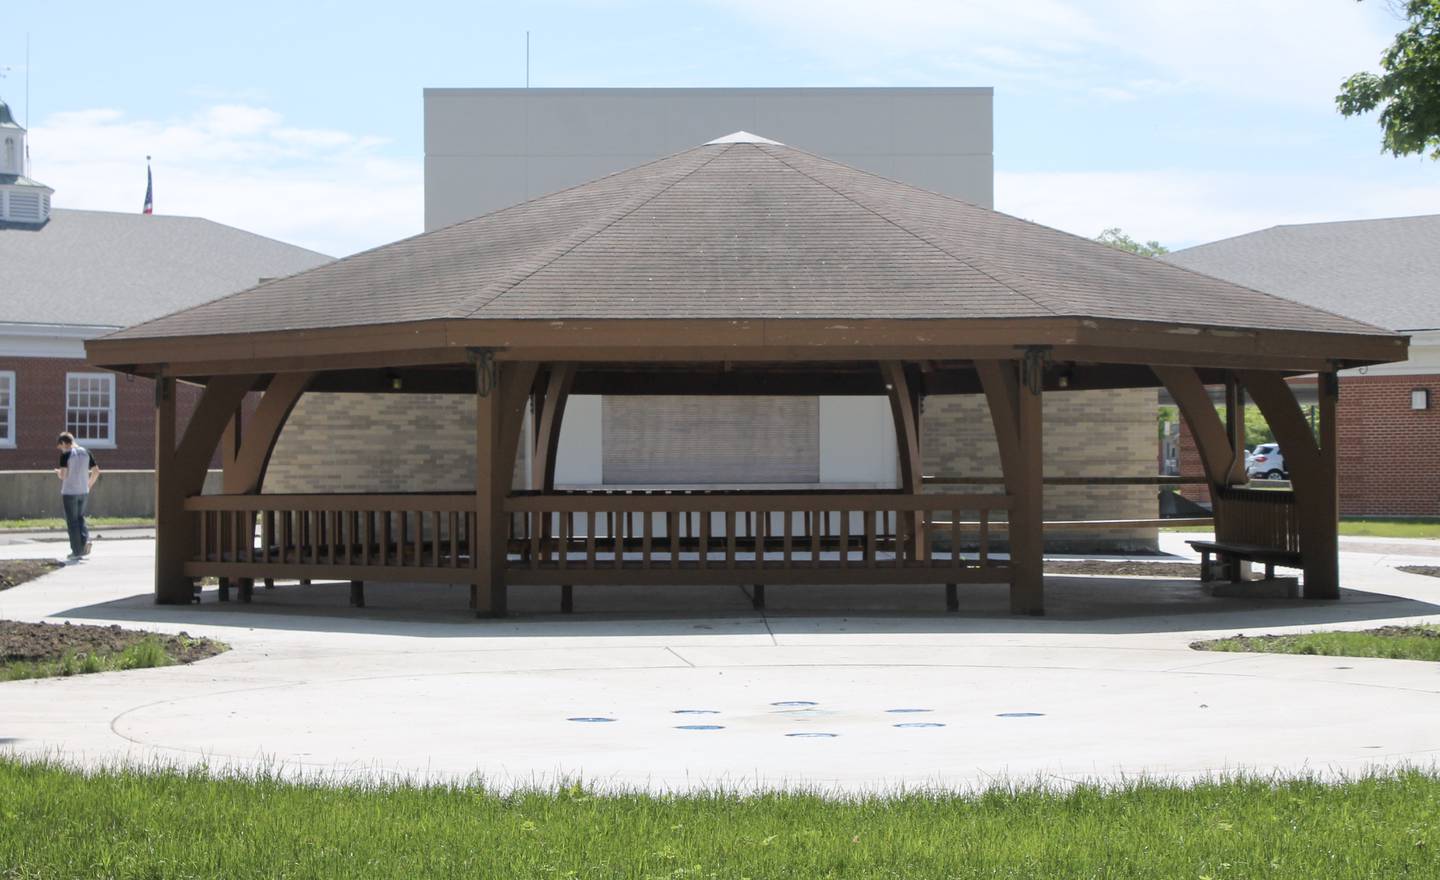 A splash pad, a ground-based jet sprayer for cooling off and recreation, sits in front of the gazebo and restroom facilities at Central Park in Sterling.